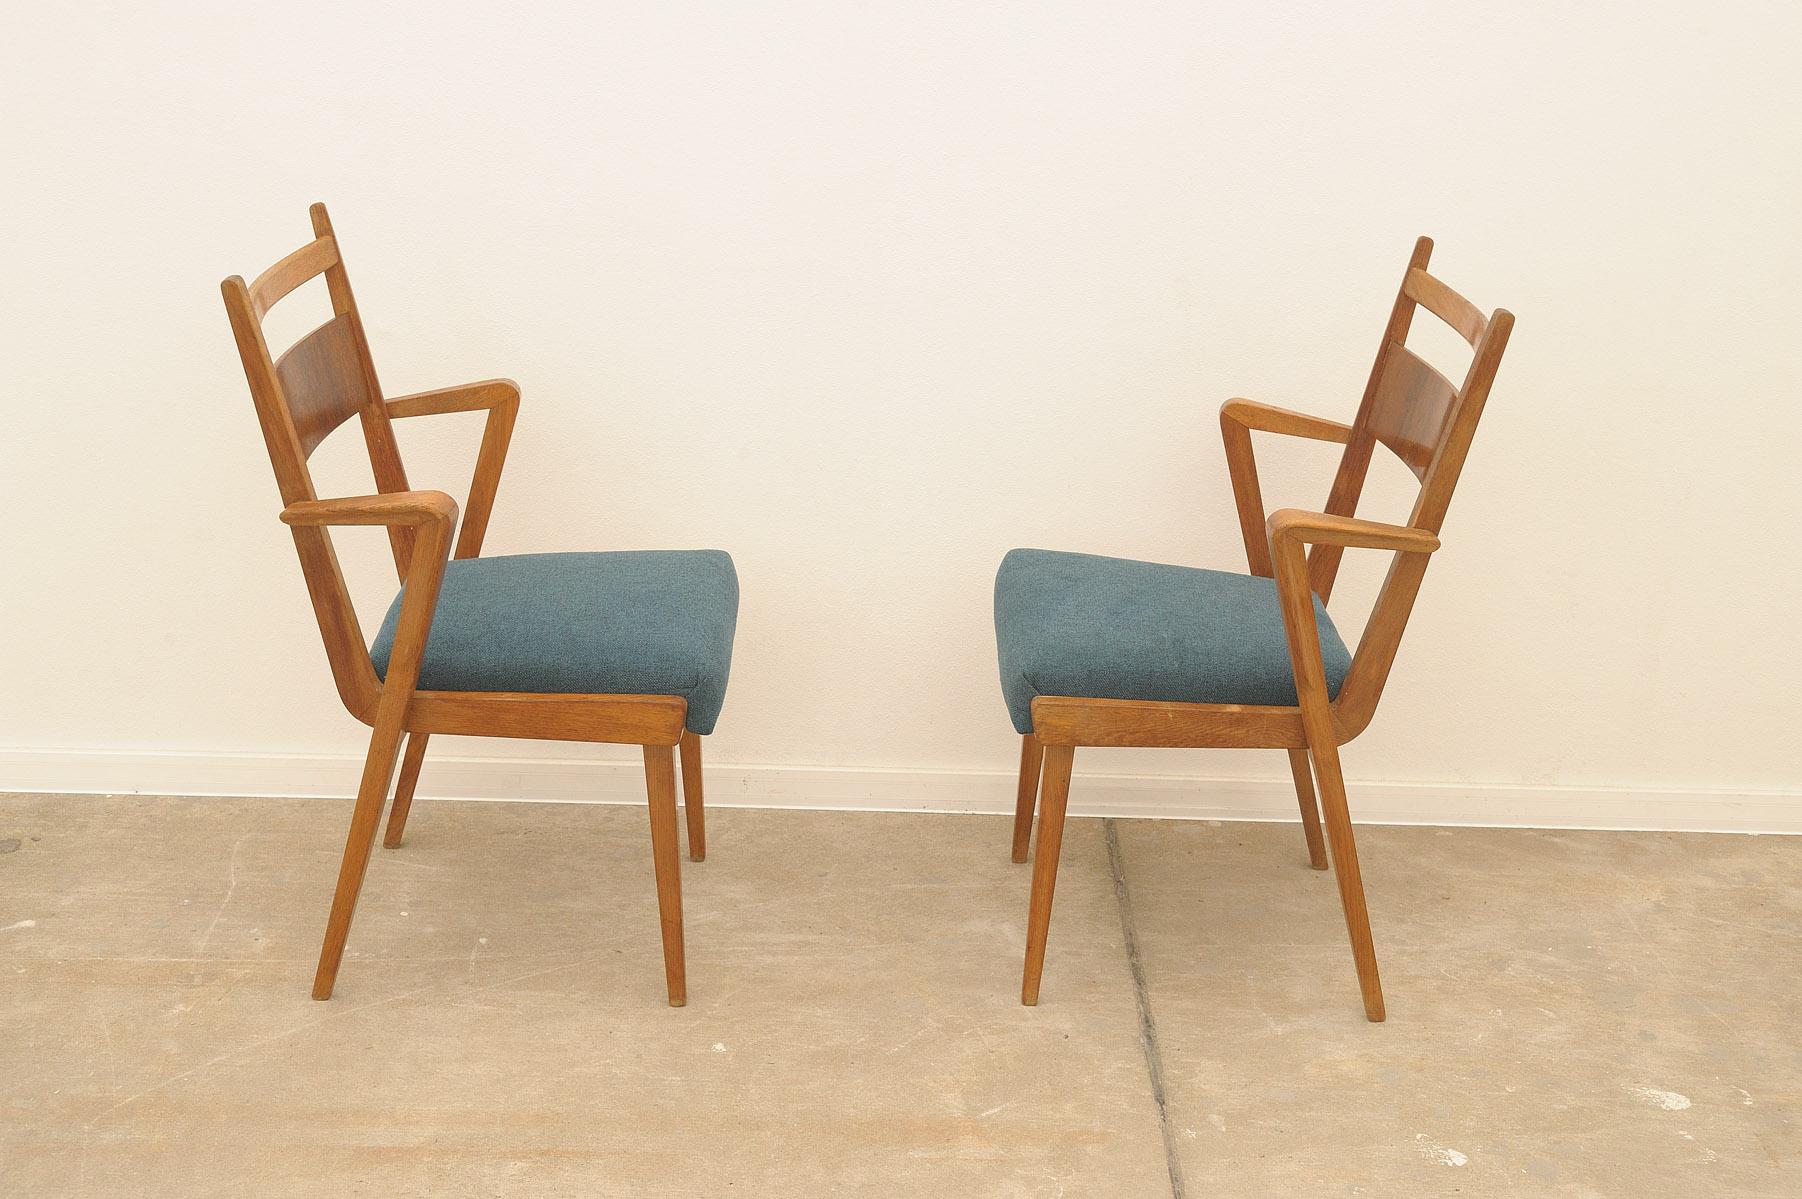 Pair of upholstered bentwood chairs by Jitona company. They were made in the former Czechoslovakia in the 1970´s. It features beech wooden structure and upholstered seat. The chairs are in good original condition, have a new fabric and wood shows